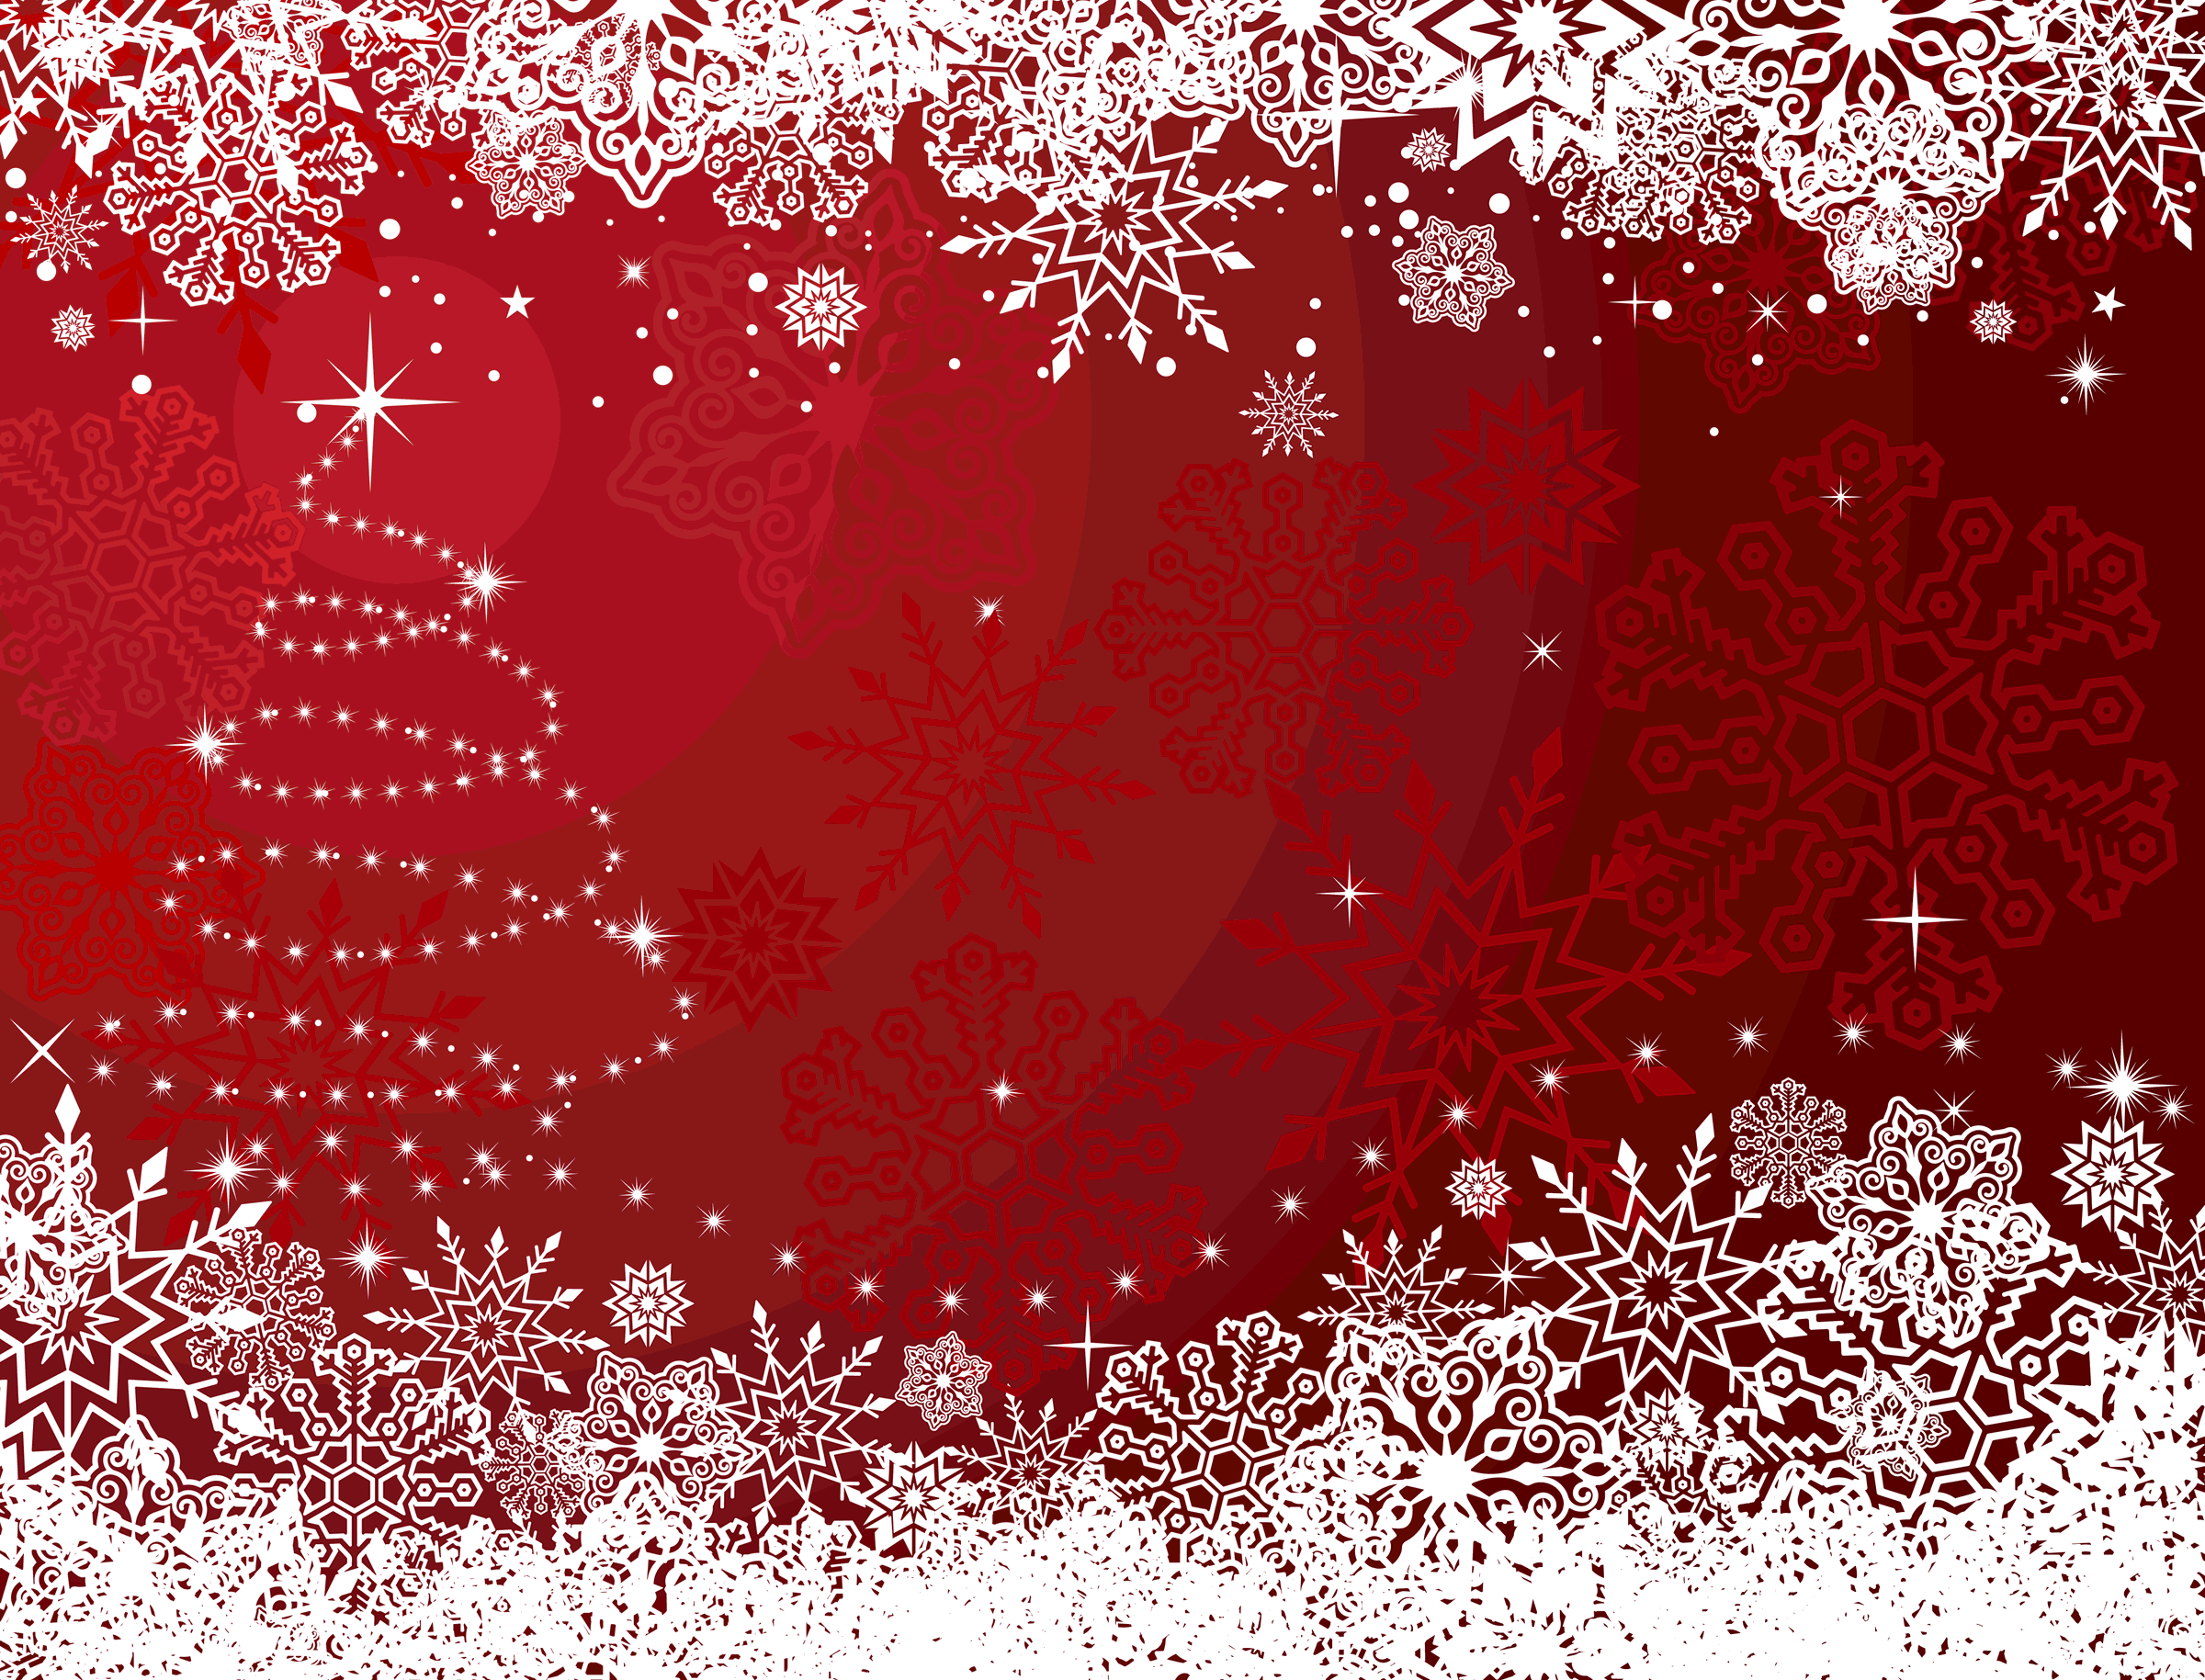 Christmas Backgrounds Picture - Wallpaper Cave